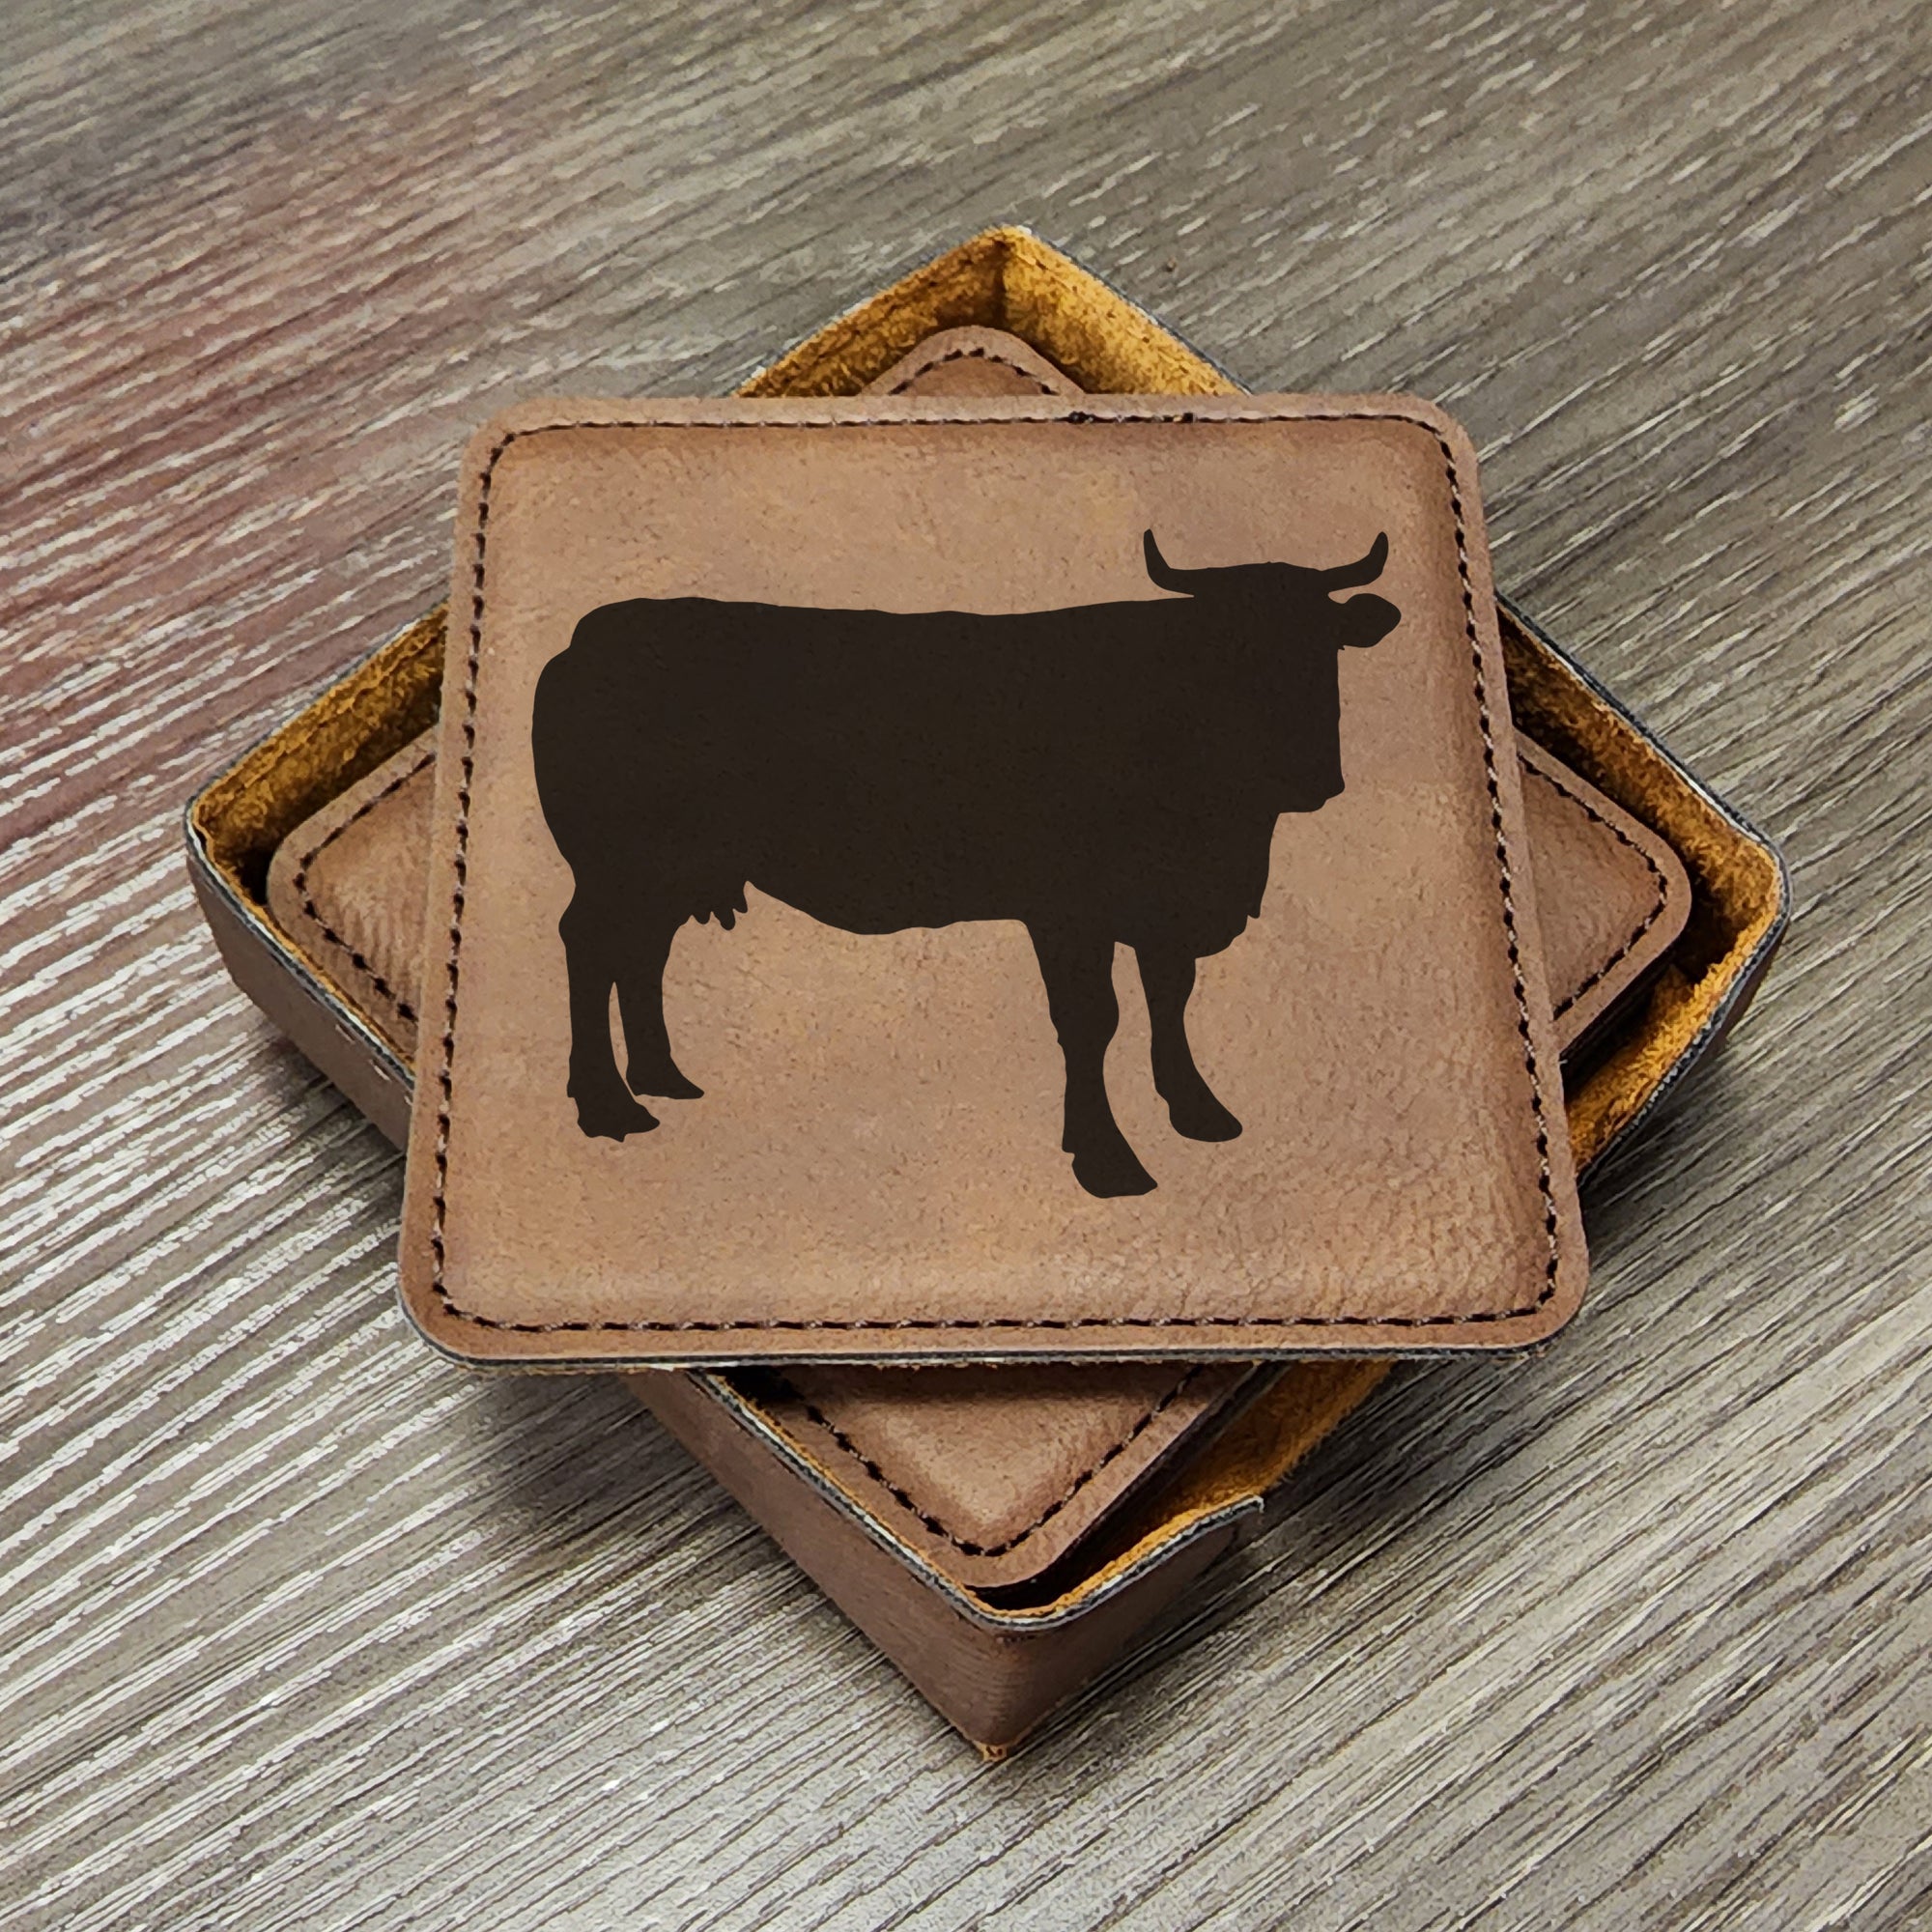 Cattle Coasters, Farmhouse Gifts, Beef Farmer Coasters, Cow Coaster, Barware Coasters, Barroom, Set of 6 With Holder